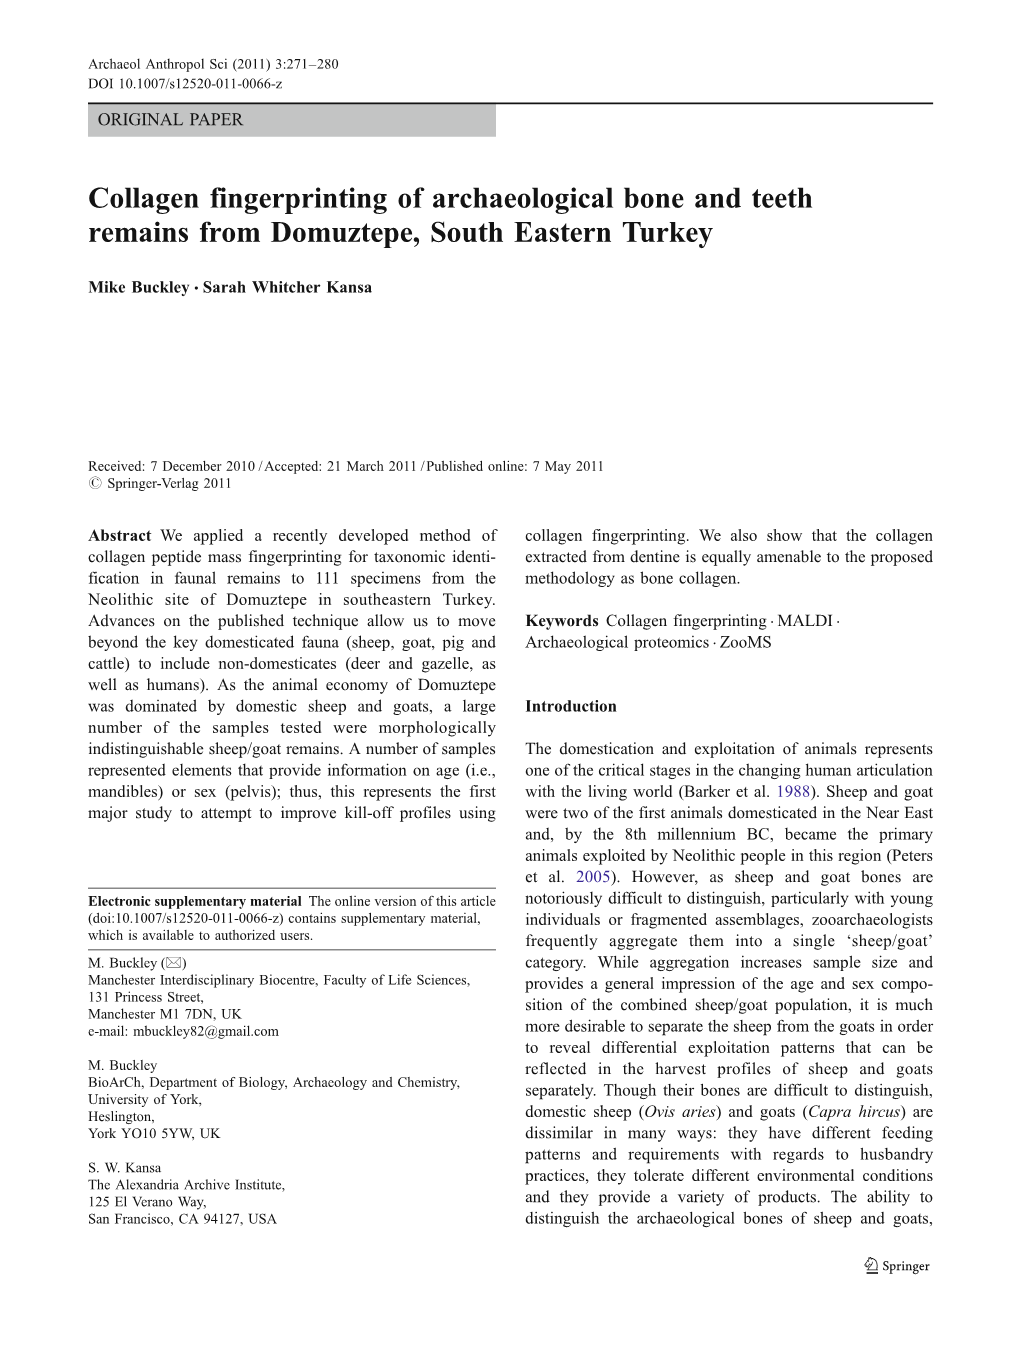 Collagen Fingerprinting of Archaeological Bone and Teeth Remains from Domuztepe, South Eastern Turkey